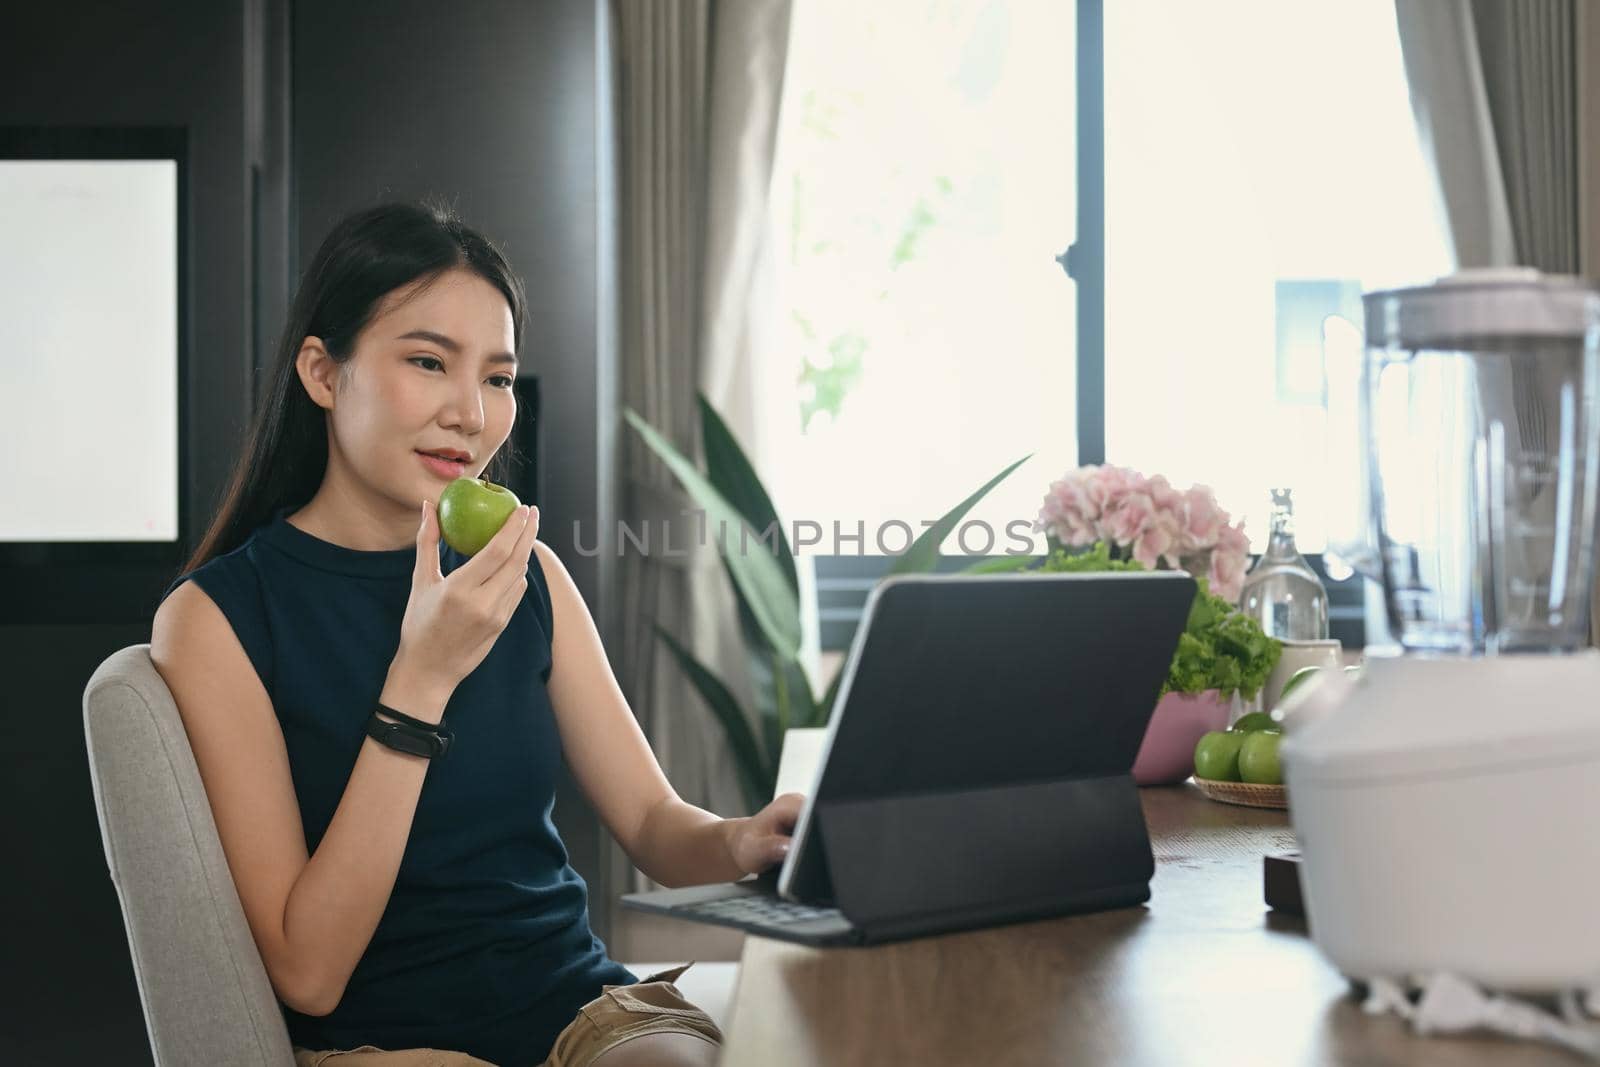 Healthy young woman eating apple and using computer tablet in kitchen.